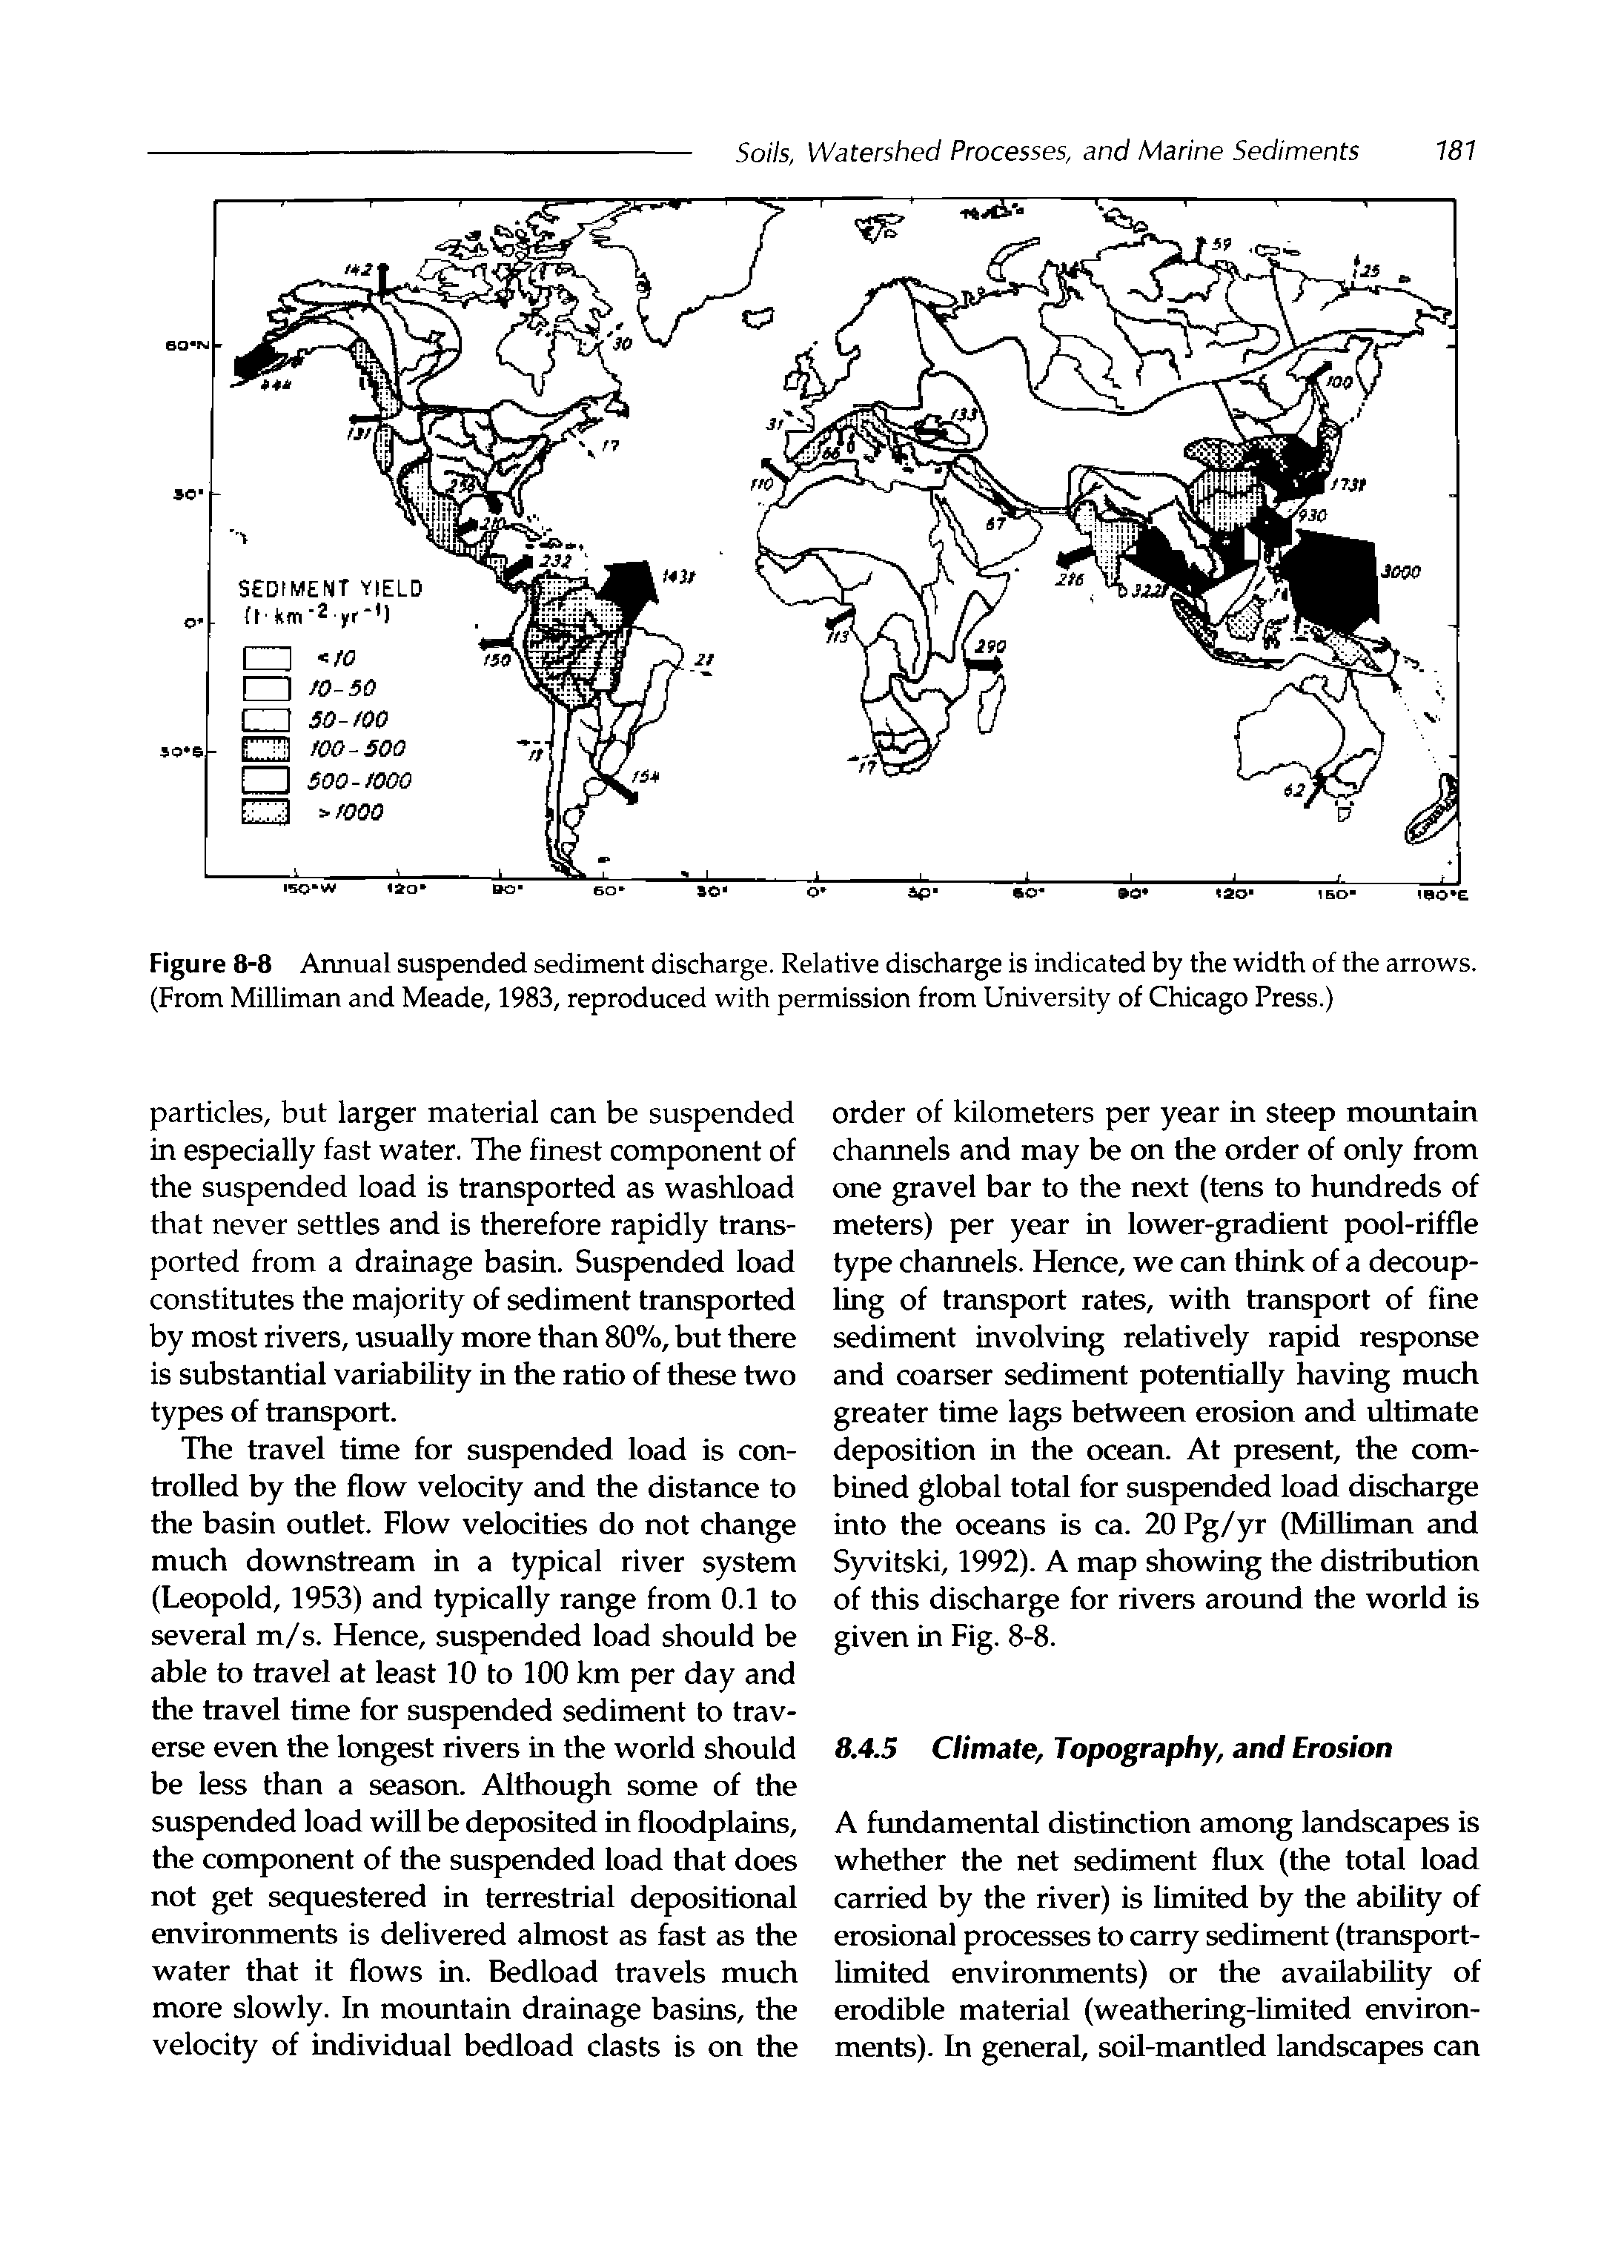 Figure 8-8 Annual suspended sediment discharge. Relative discharge is indicated by the width of the arrows. (From Milliman and Meade, 1983, reproduced with permission from University of Chicago Press.)...